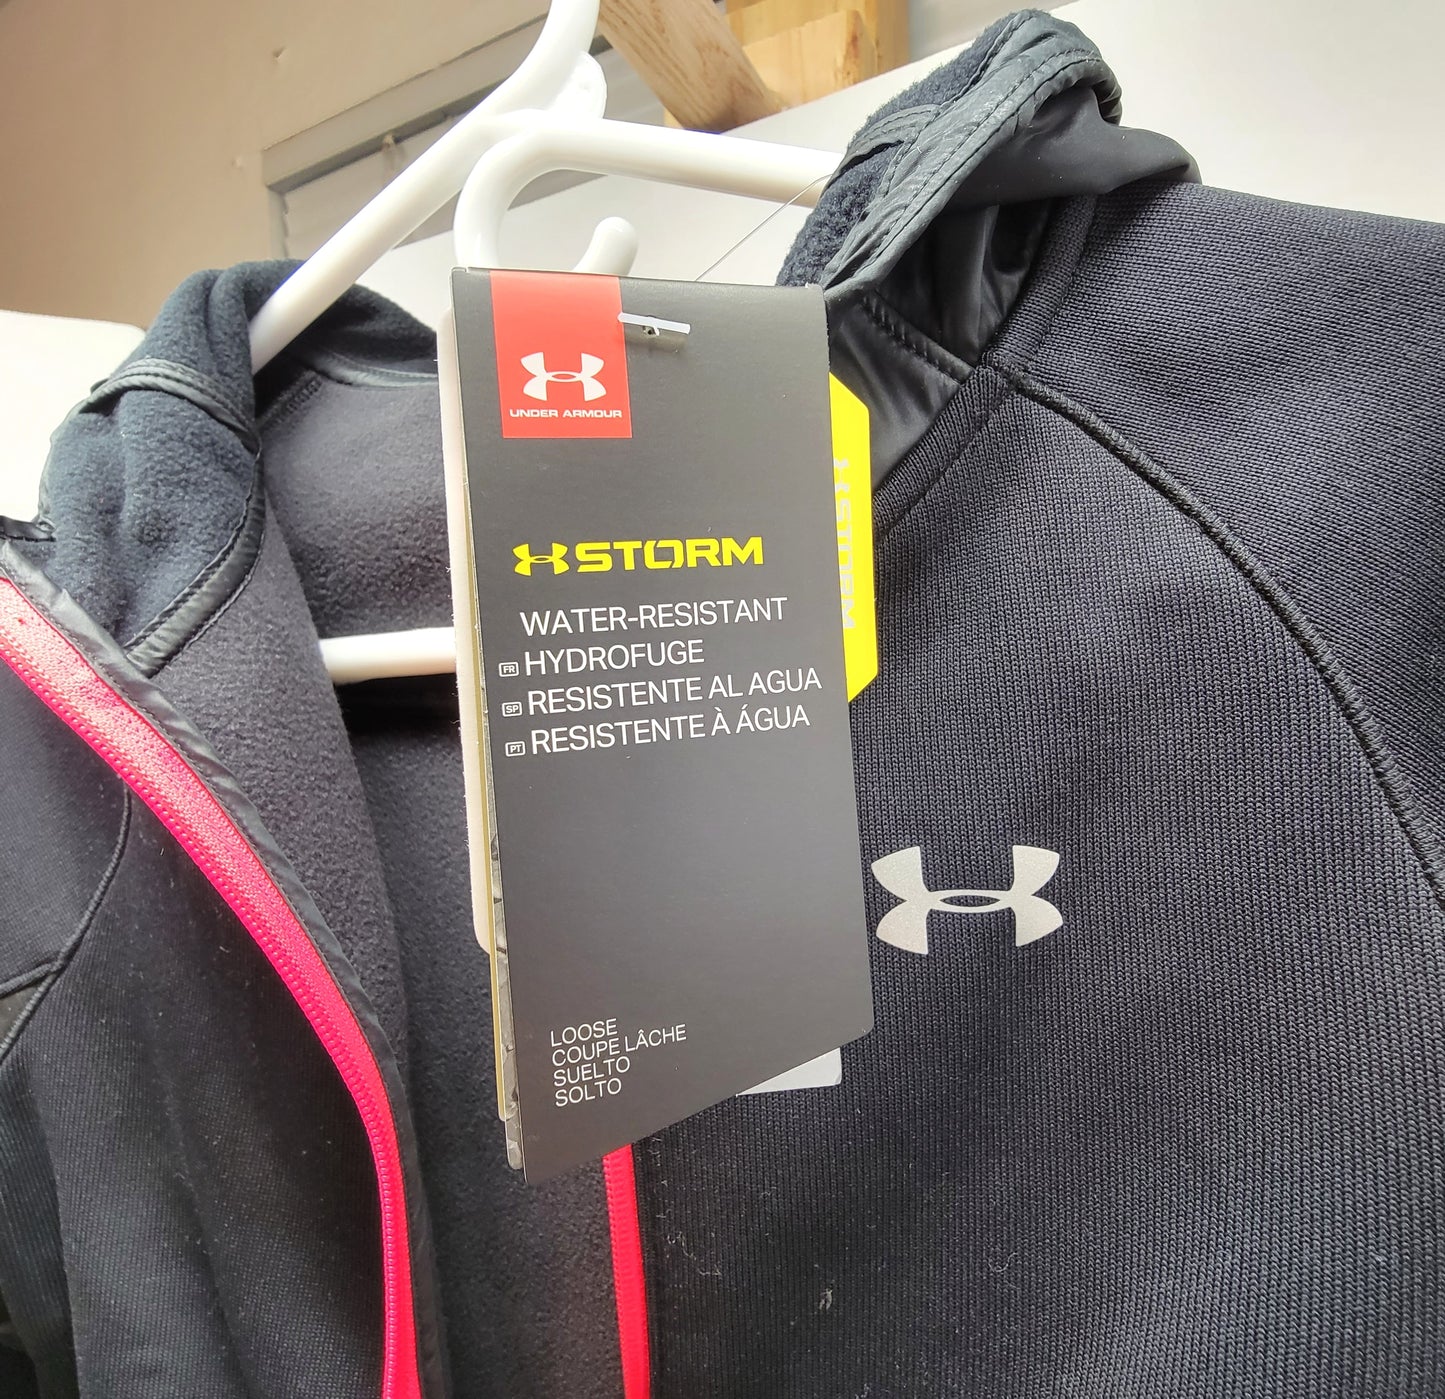 Under Armour Girls Size YLG Storm Black & Pink Jacket Retail $99.99